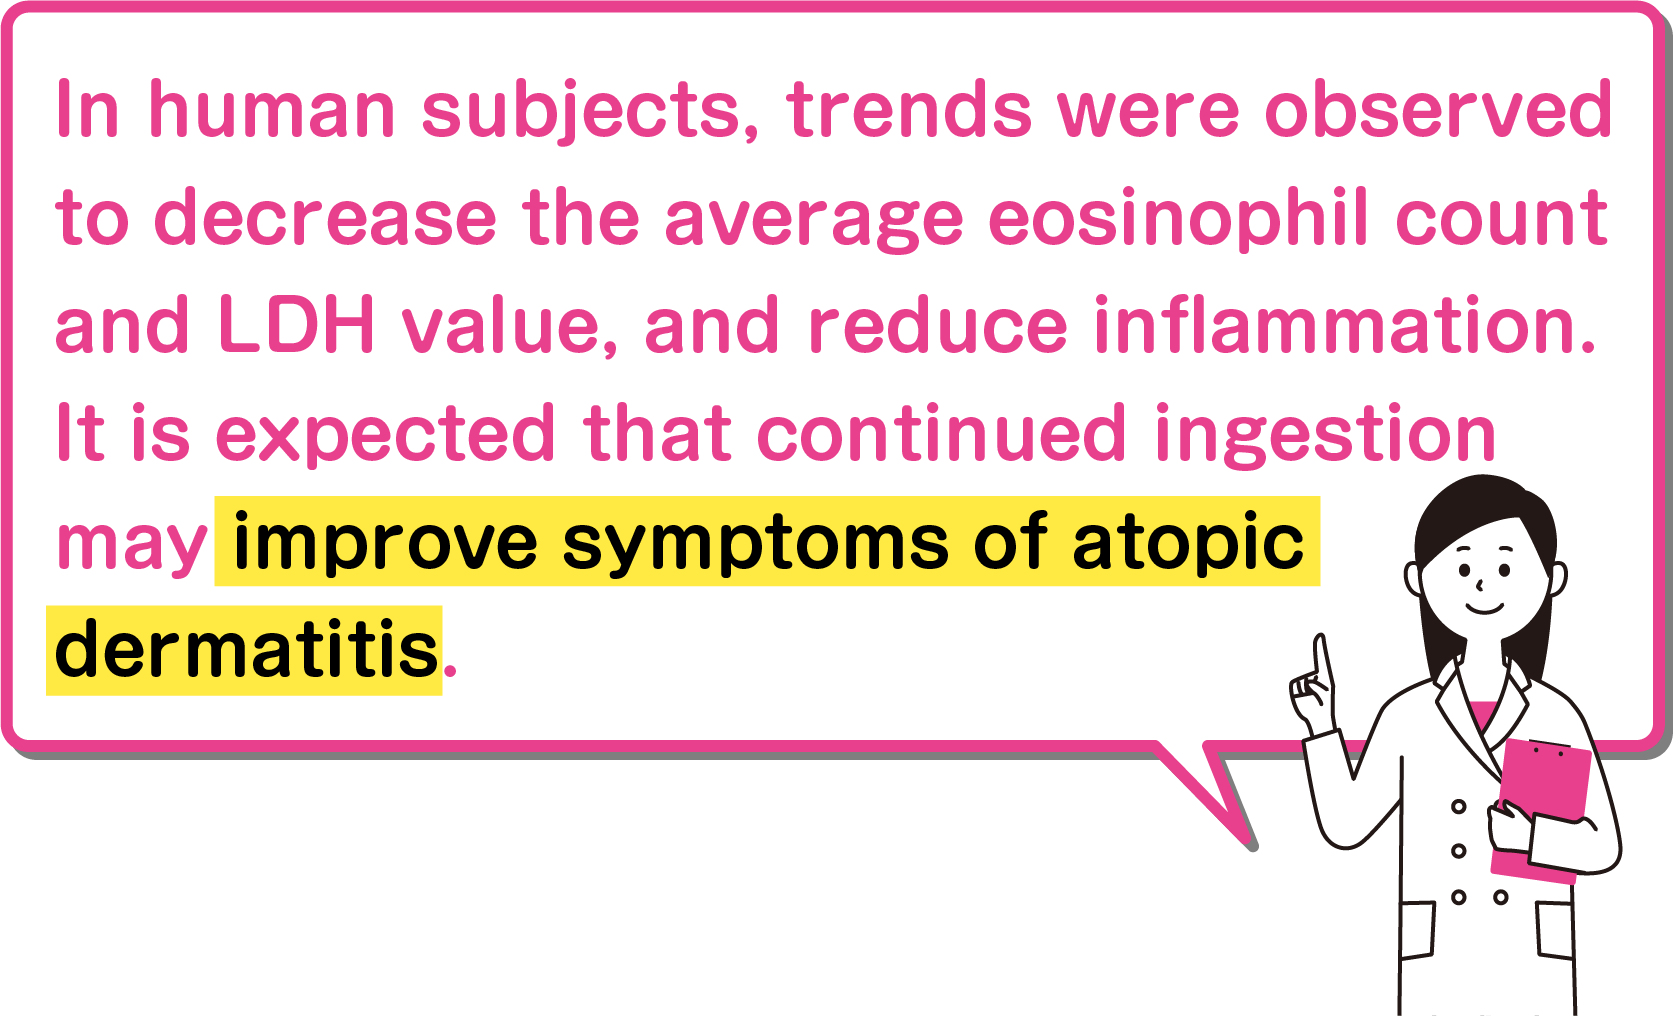 In human subjects, trends were observed to decrease the average eosinophil count and LDH value, and reduce inflammation. It is expected that continued ingestion may improve symptoms of atopic dermatitis.